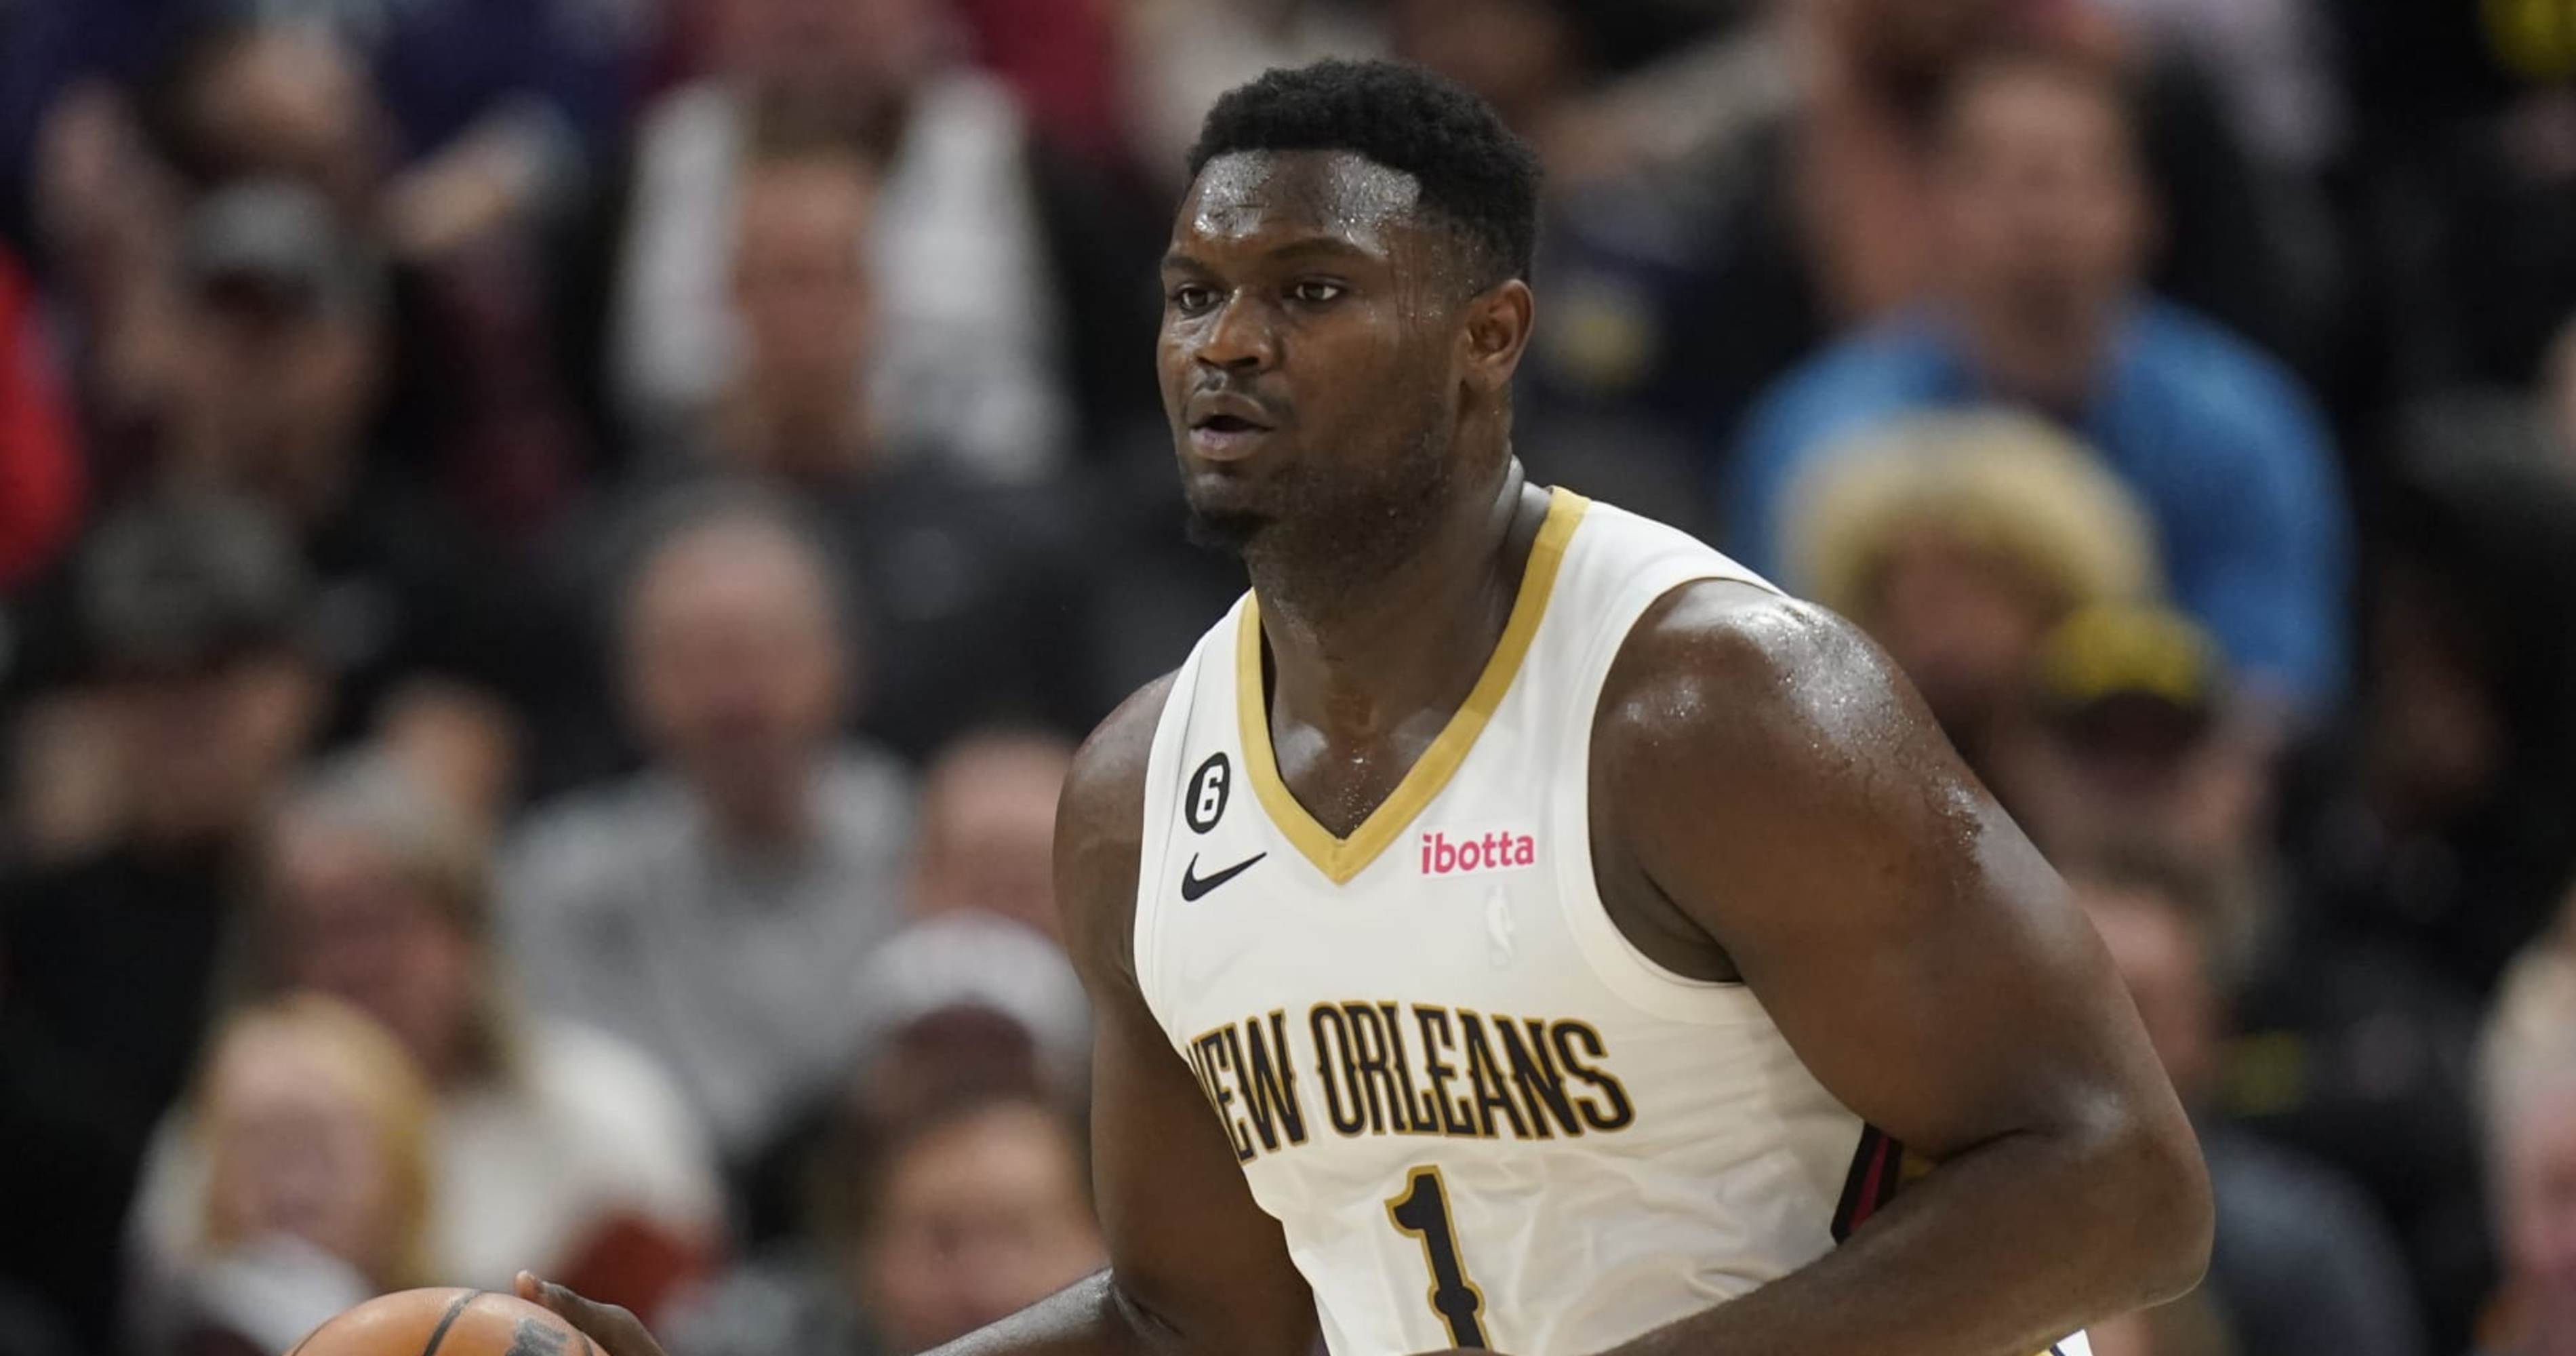 Pelicans' Zion Williamson 'Really Focused' in Offseason Training